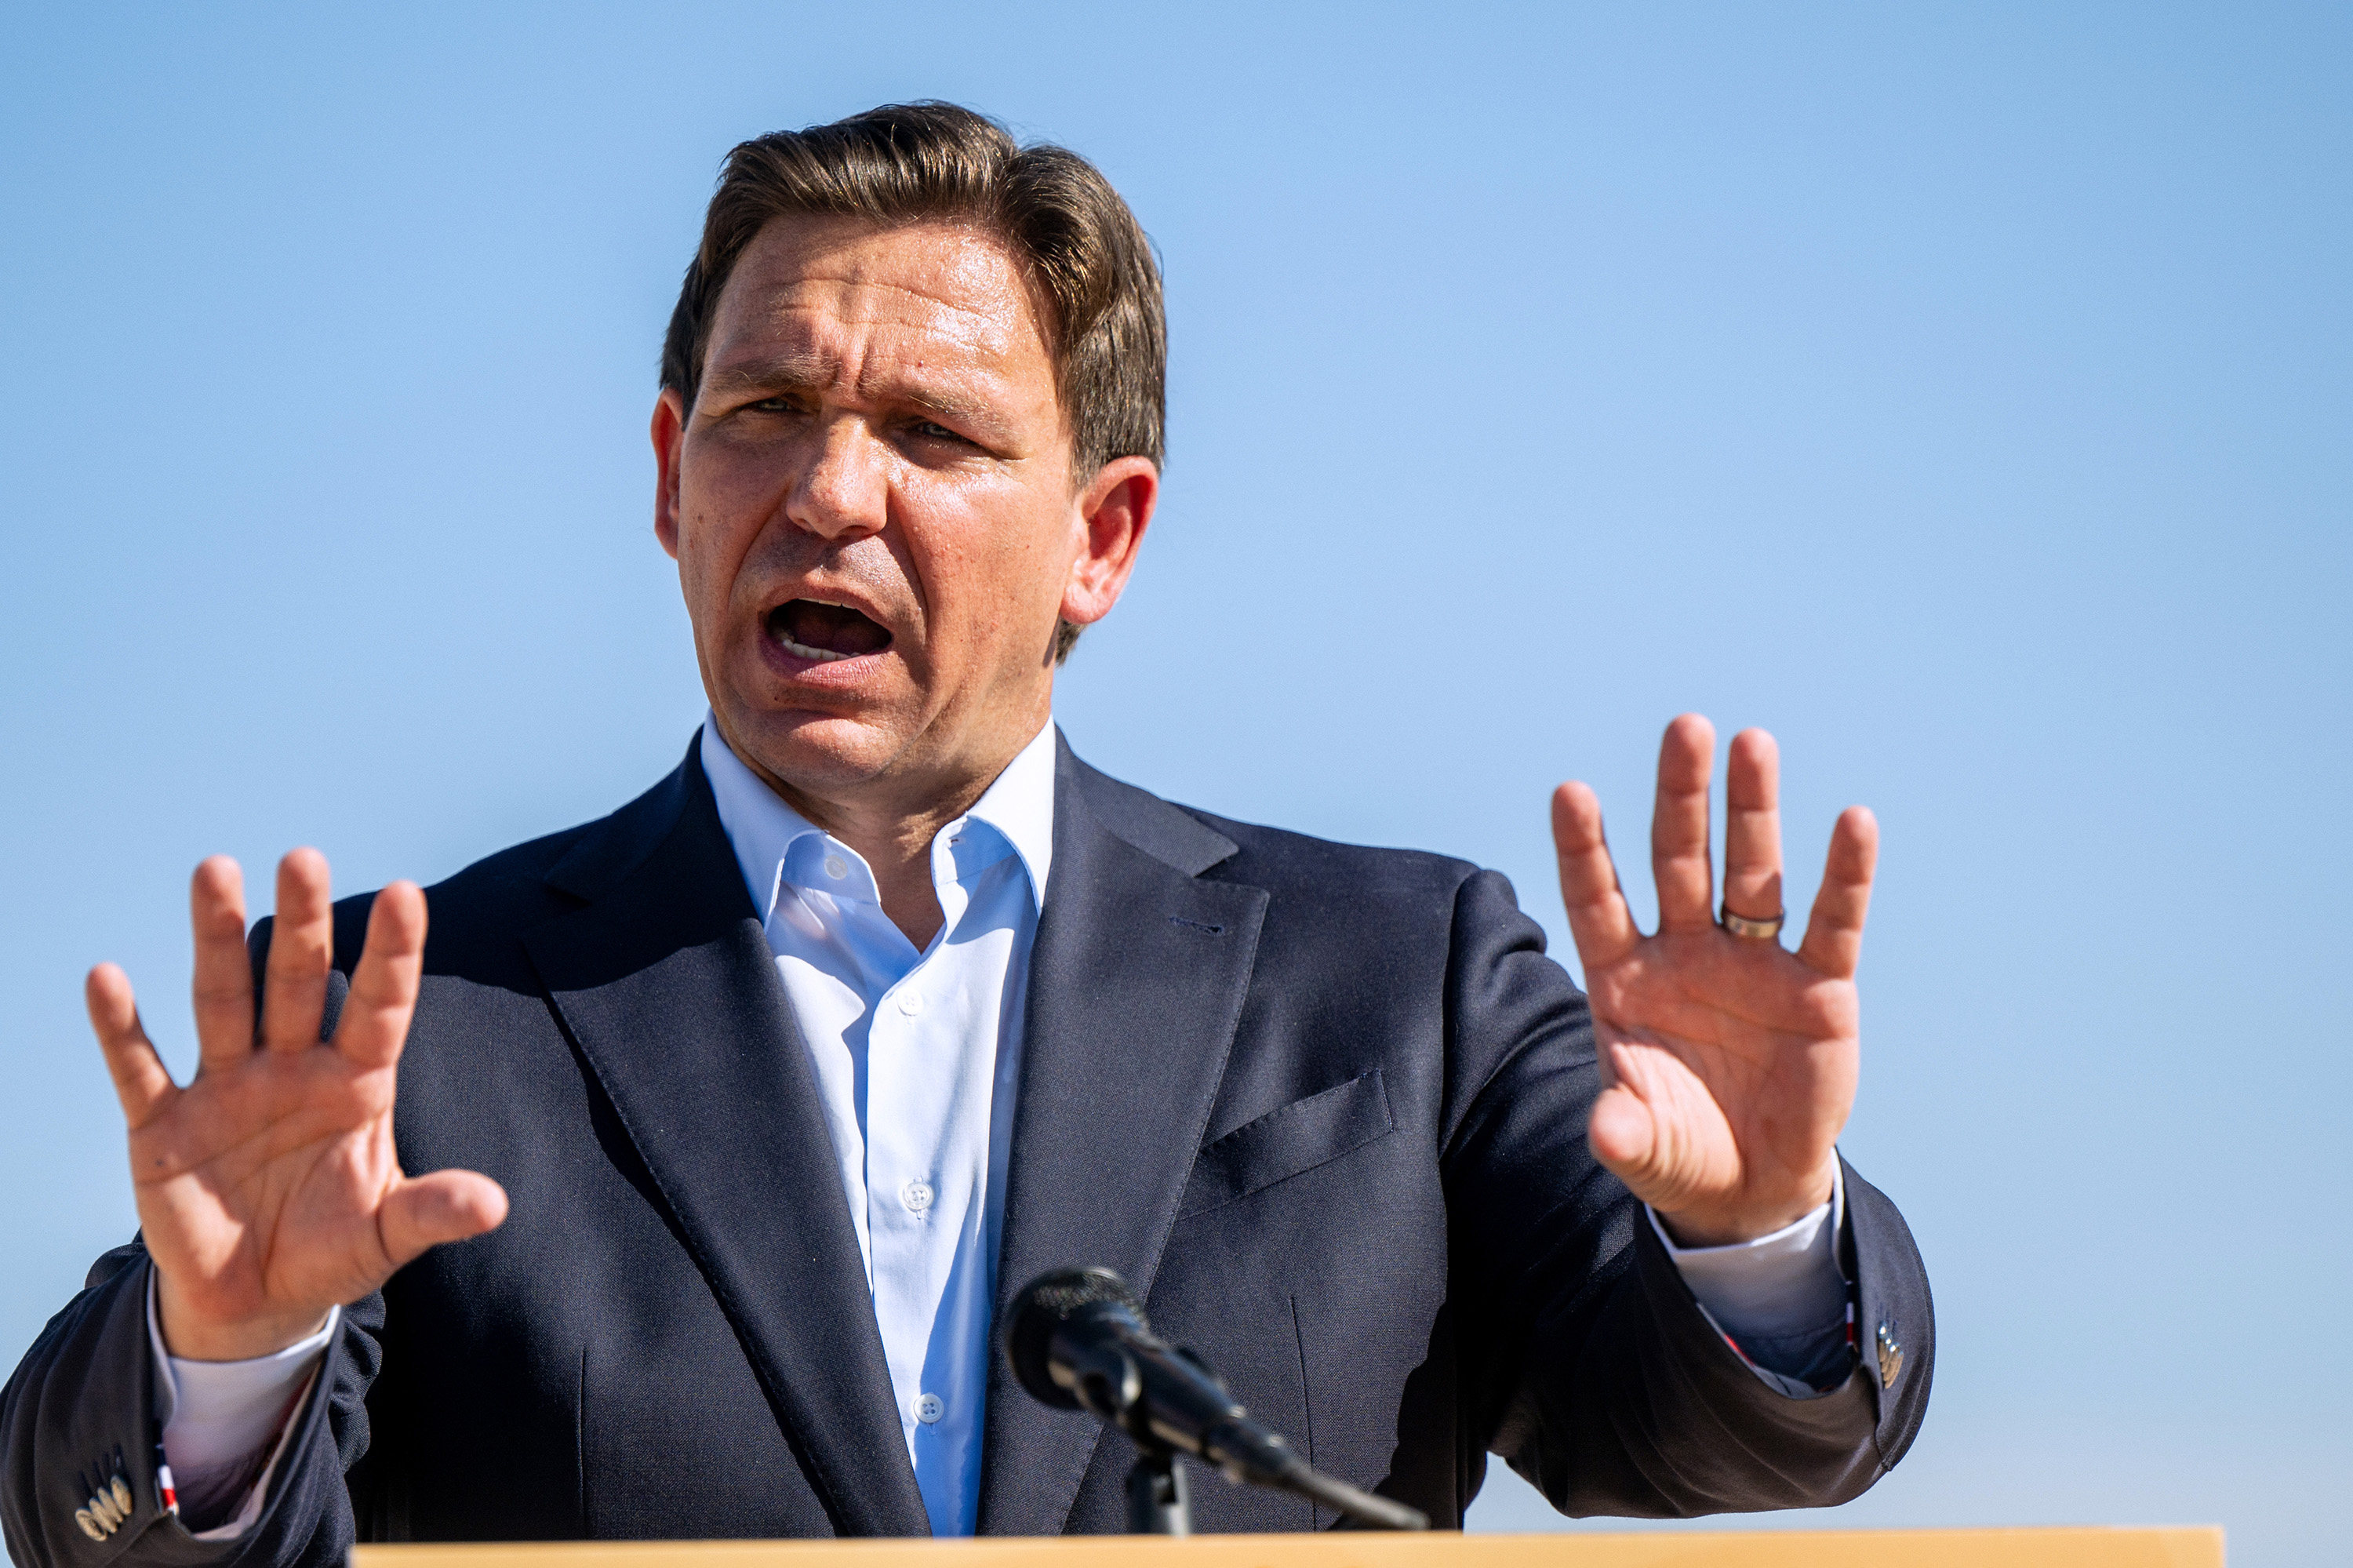 Florida Governor Ron DeSantis speaks during a campaign event in Midland, Texas, on Wednesday. Photo: TNS